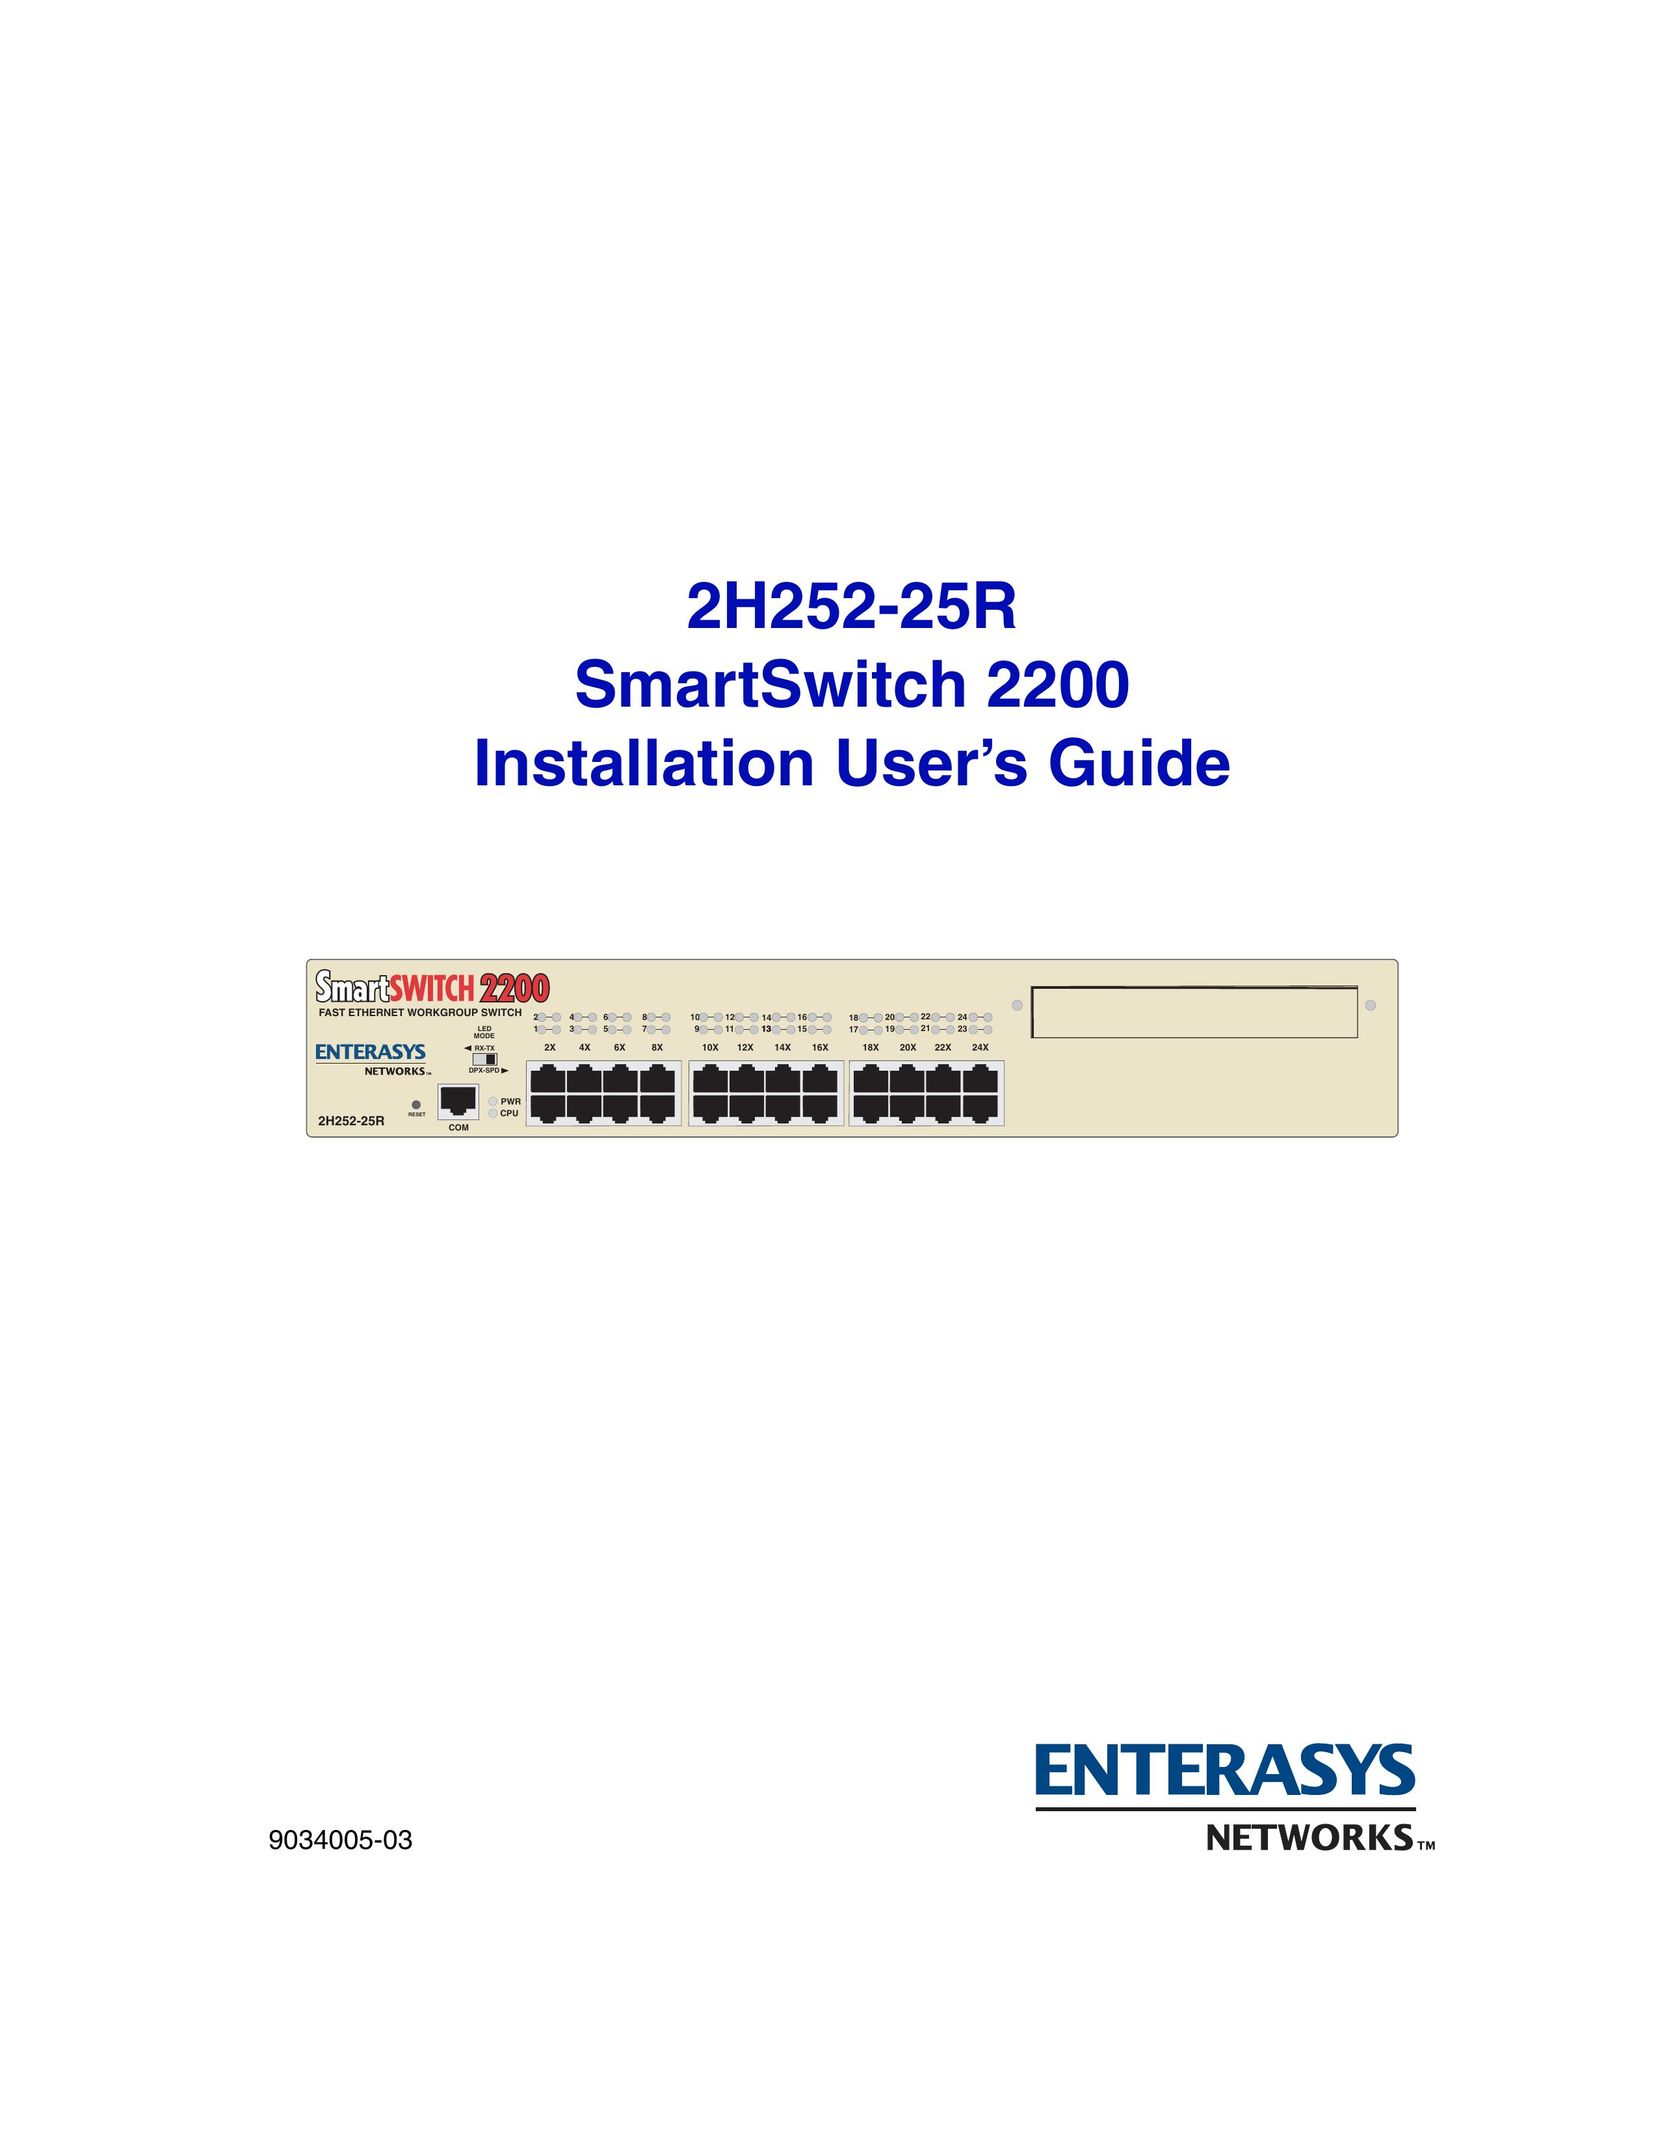 Enterasys Networks 2H252-25R Switch User Manual